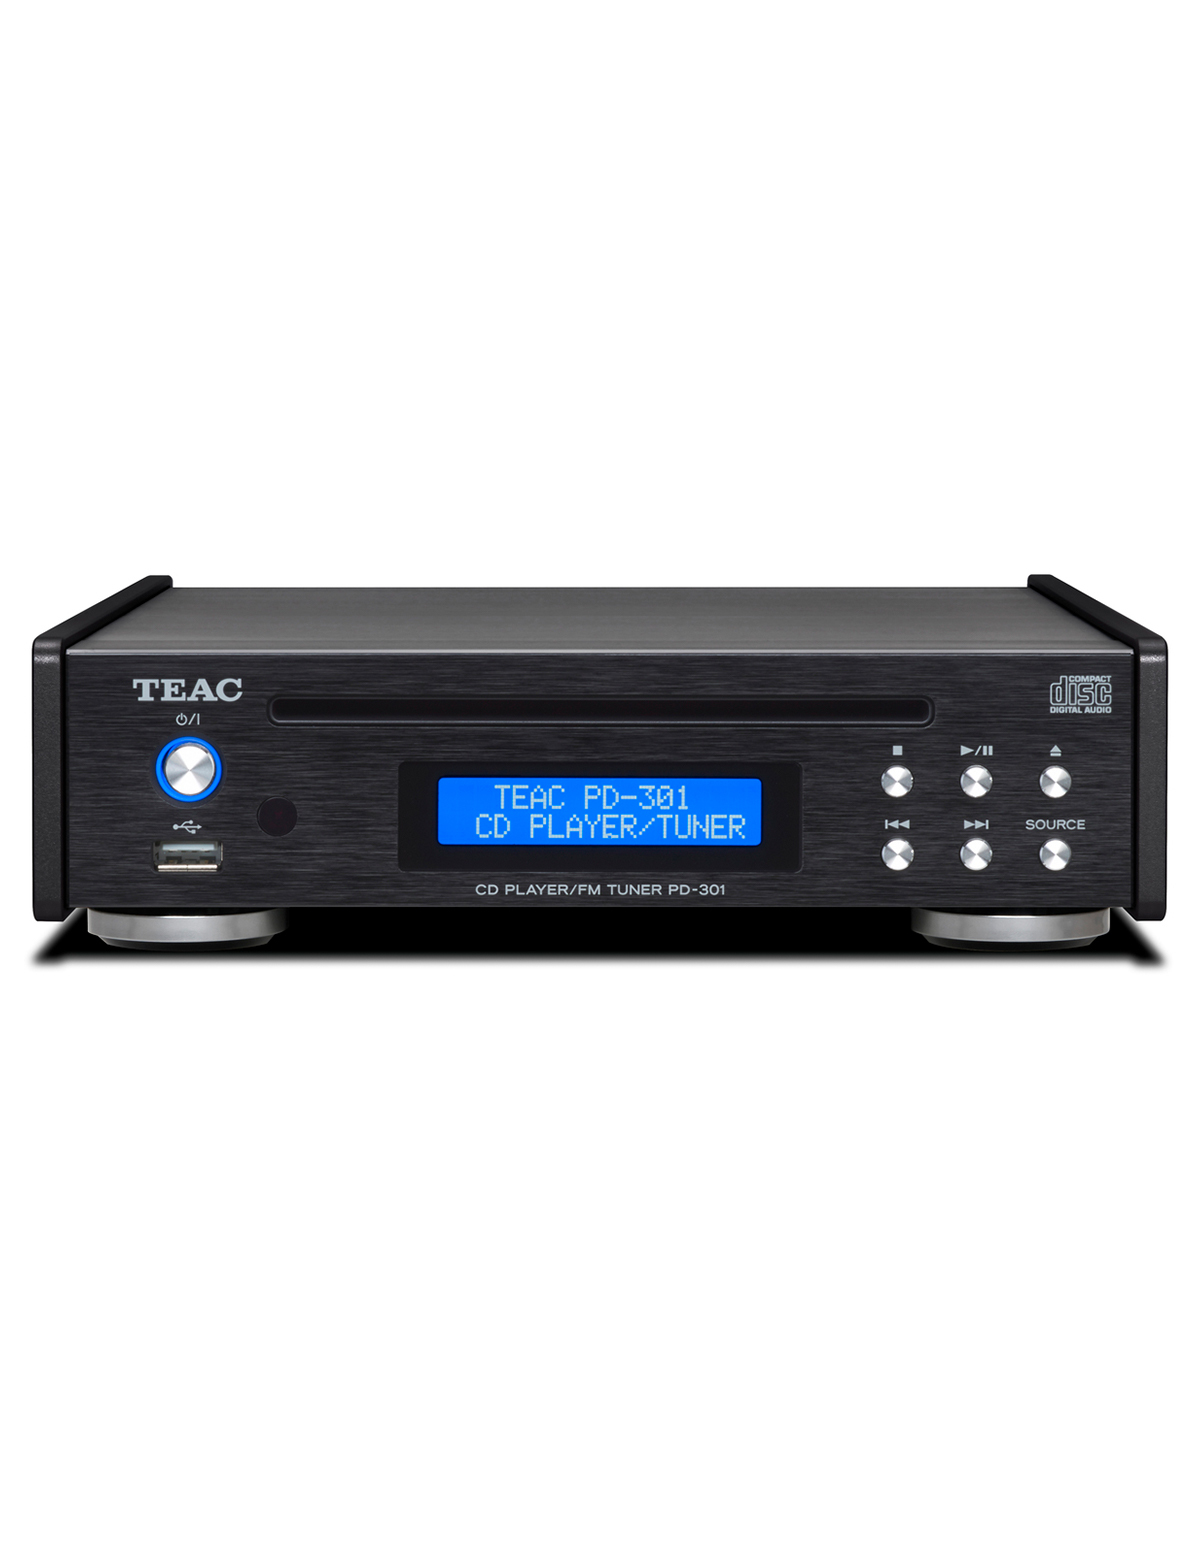 DAB/UKW-Tuner Silber Teac PD-301DAB High End CD-Spieler inkl 